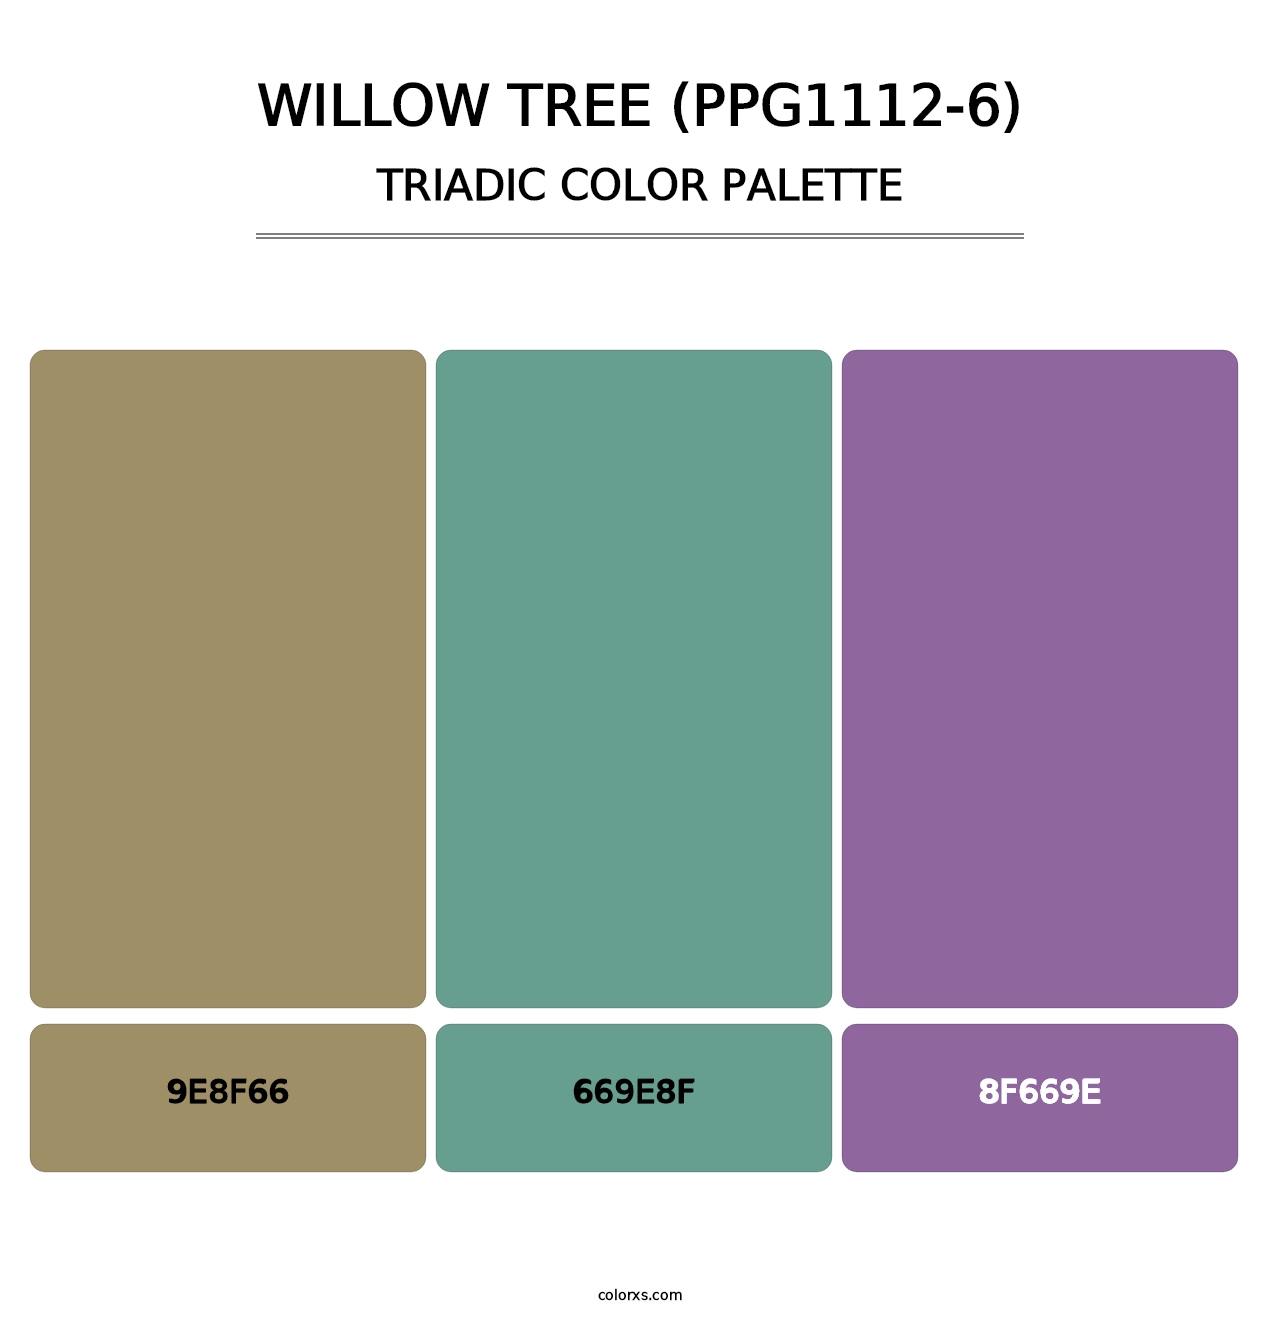 Willow Tree (PPG1112-6) - Triadic Color Palette